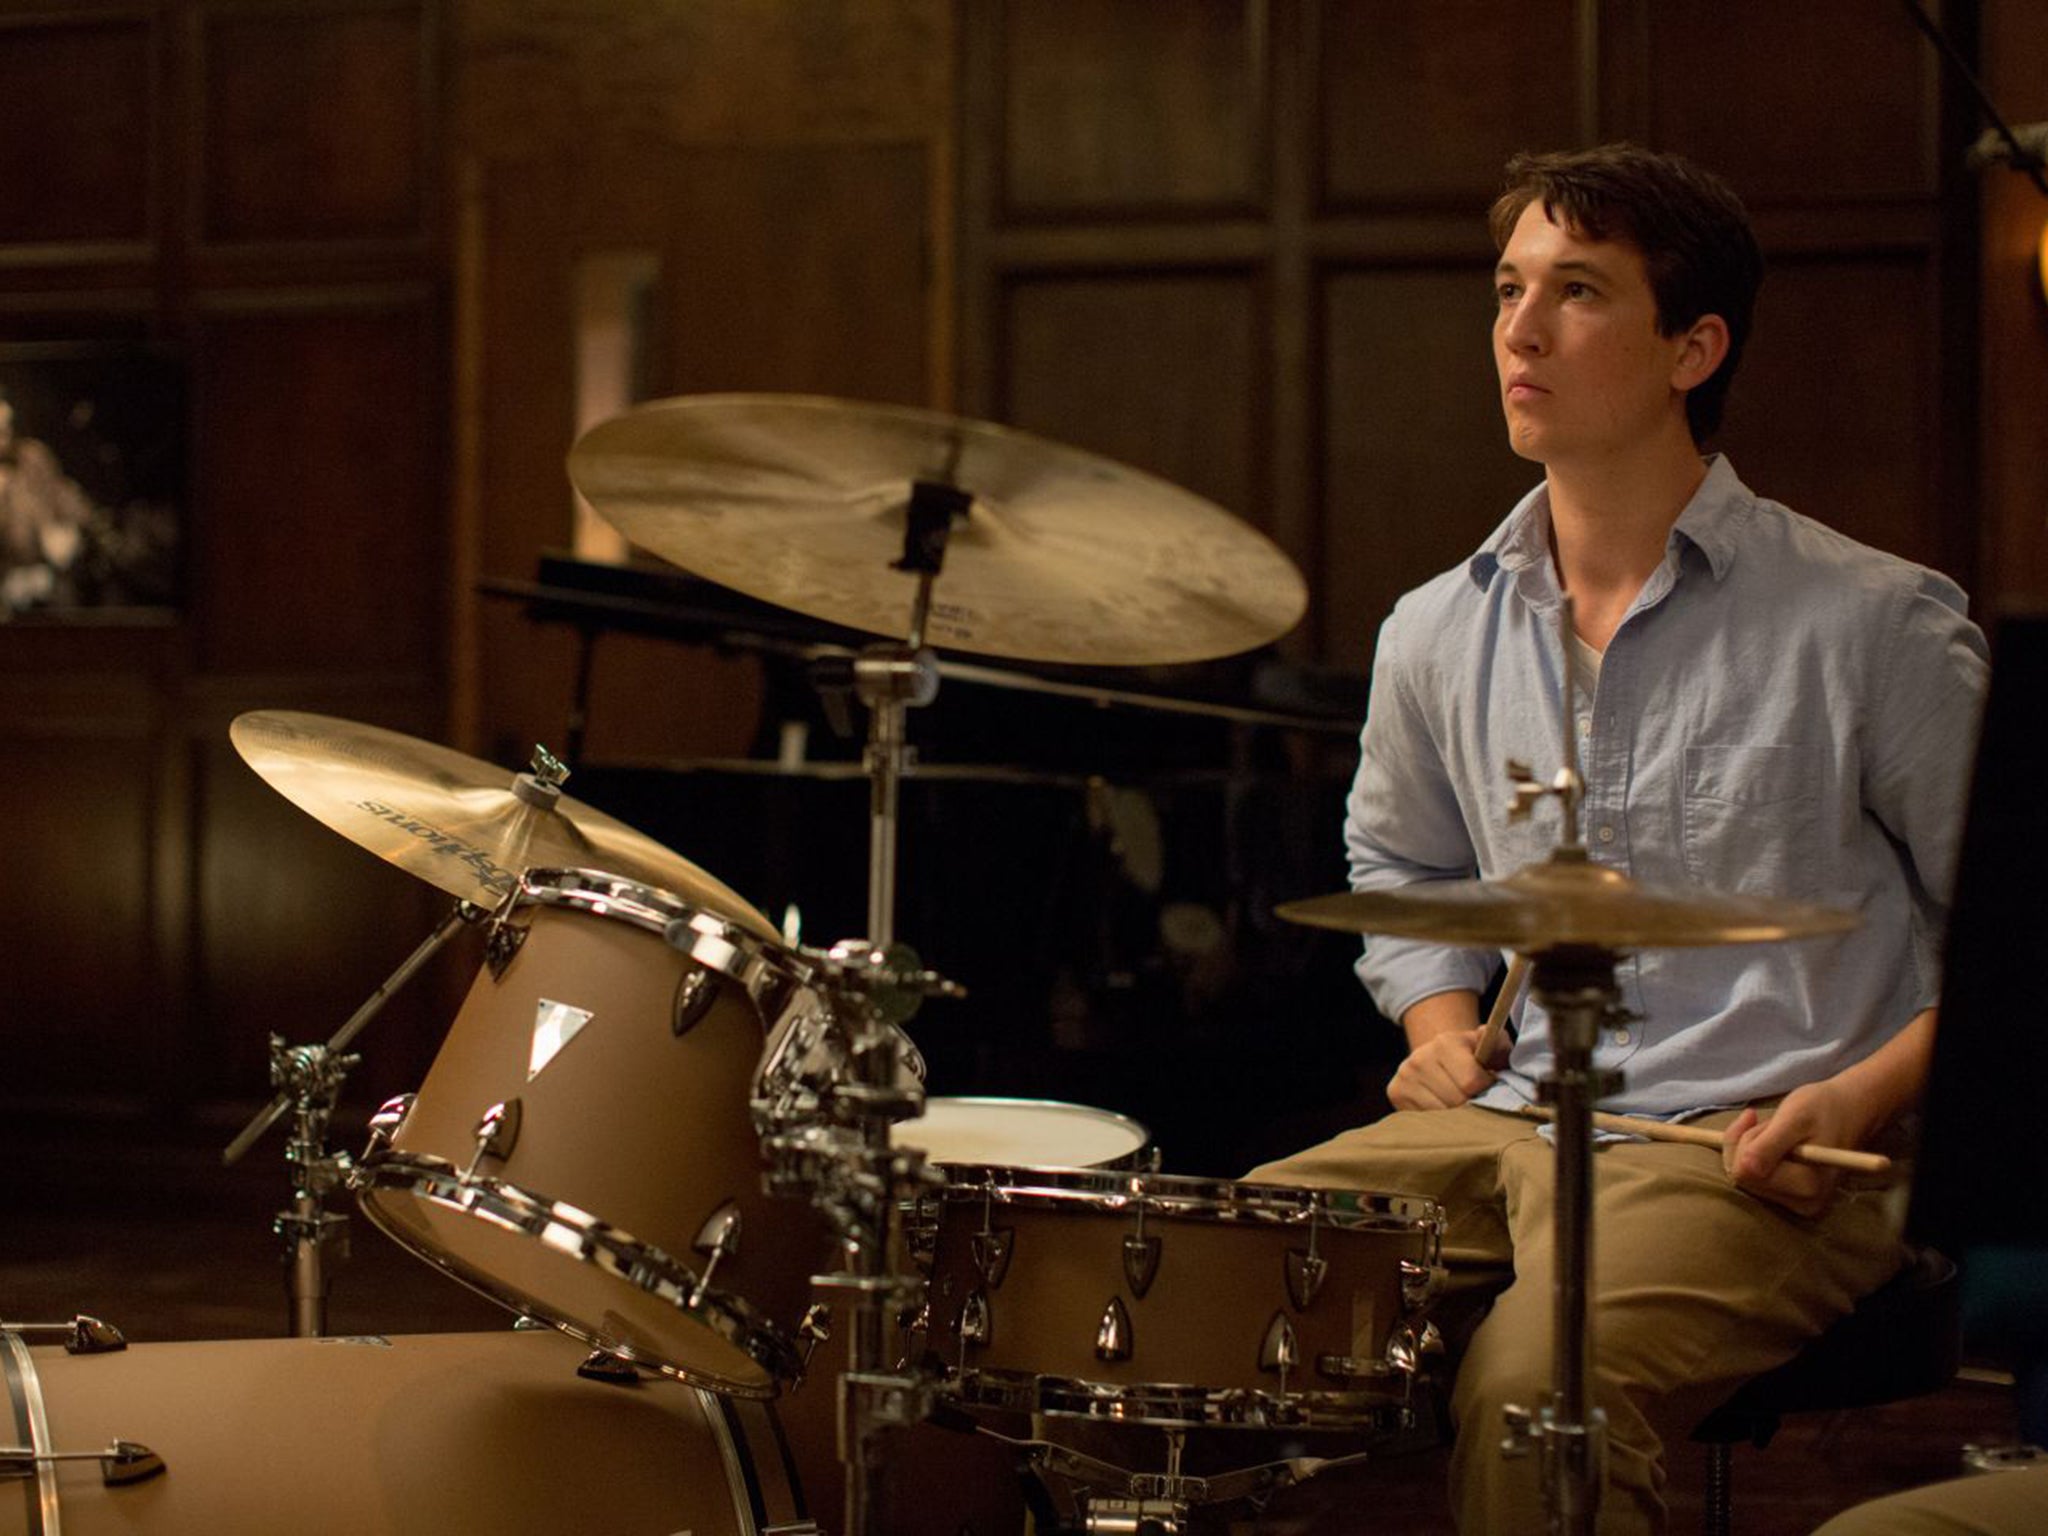 The Oscar-nominated ‘Whiplash’ may hold advice for party members voting for new leaders (Sony)